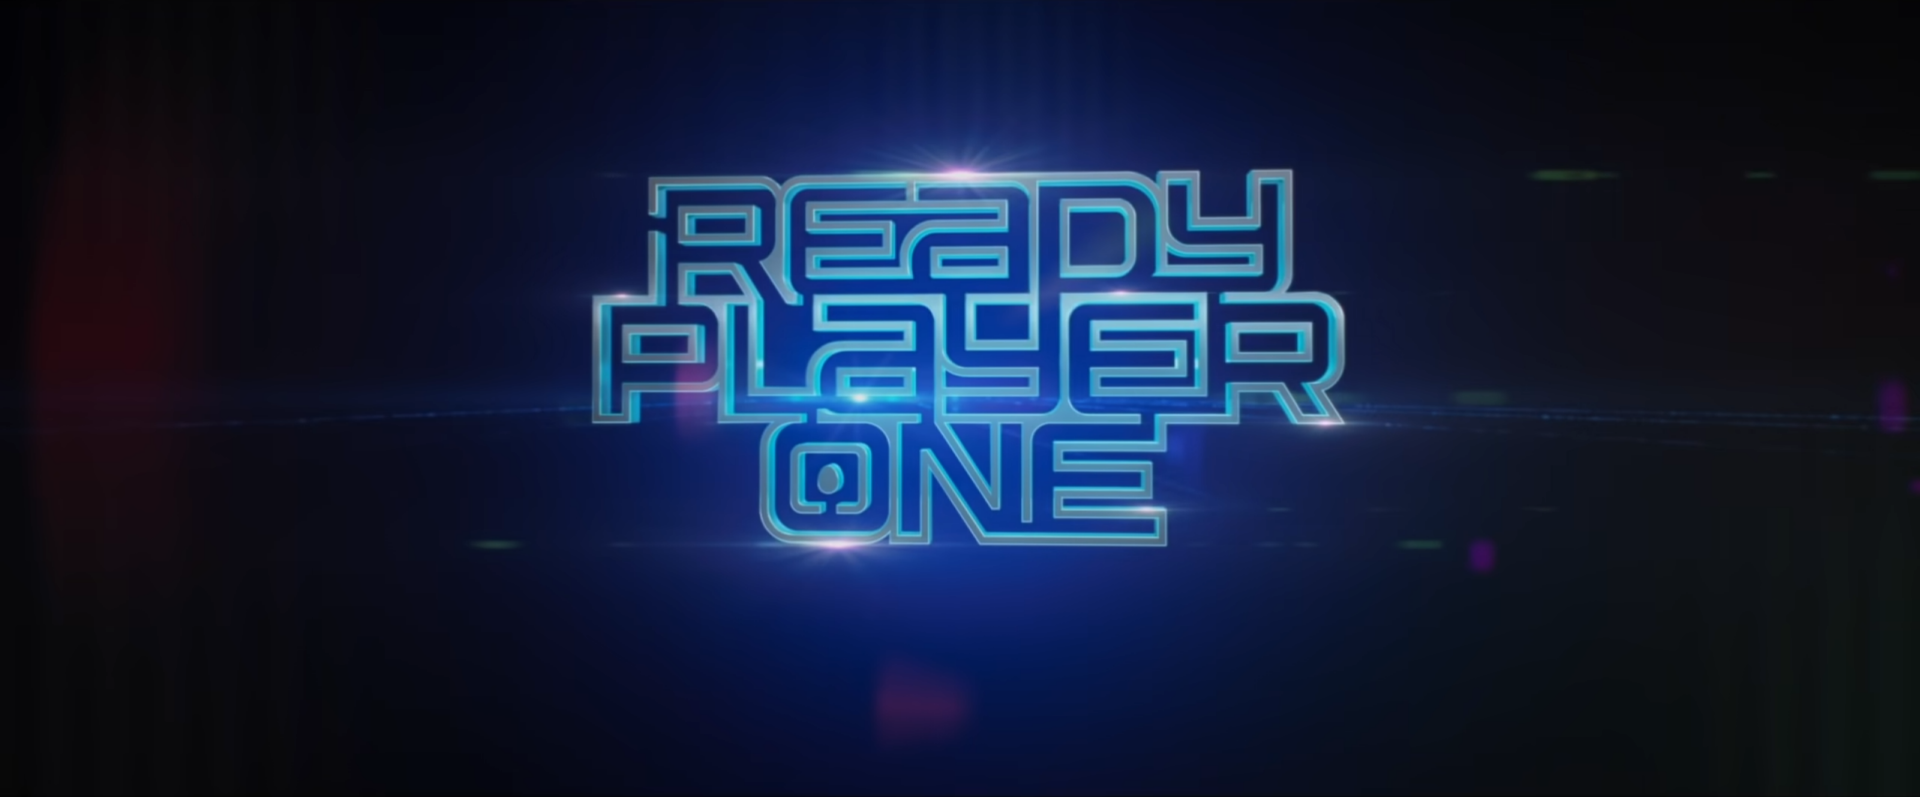 Sorrento ready Player one. Ready to play